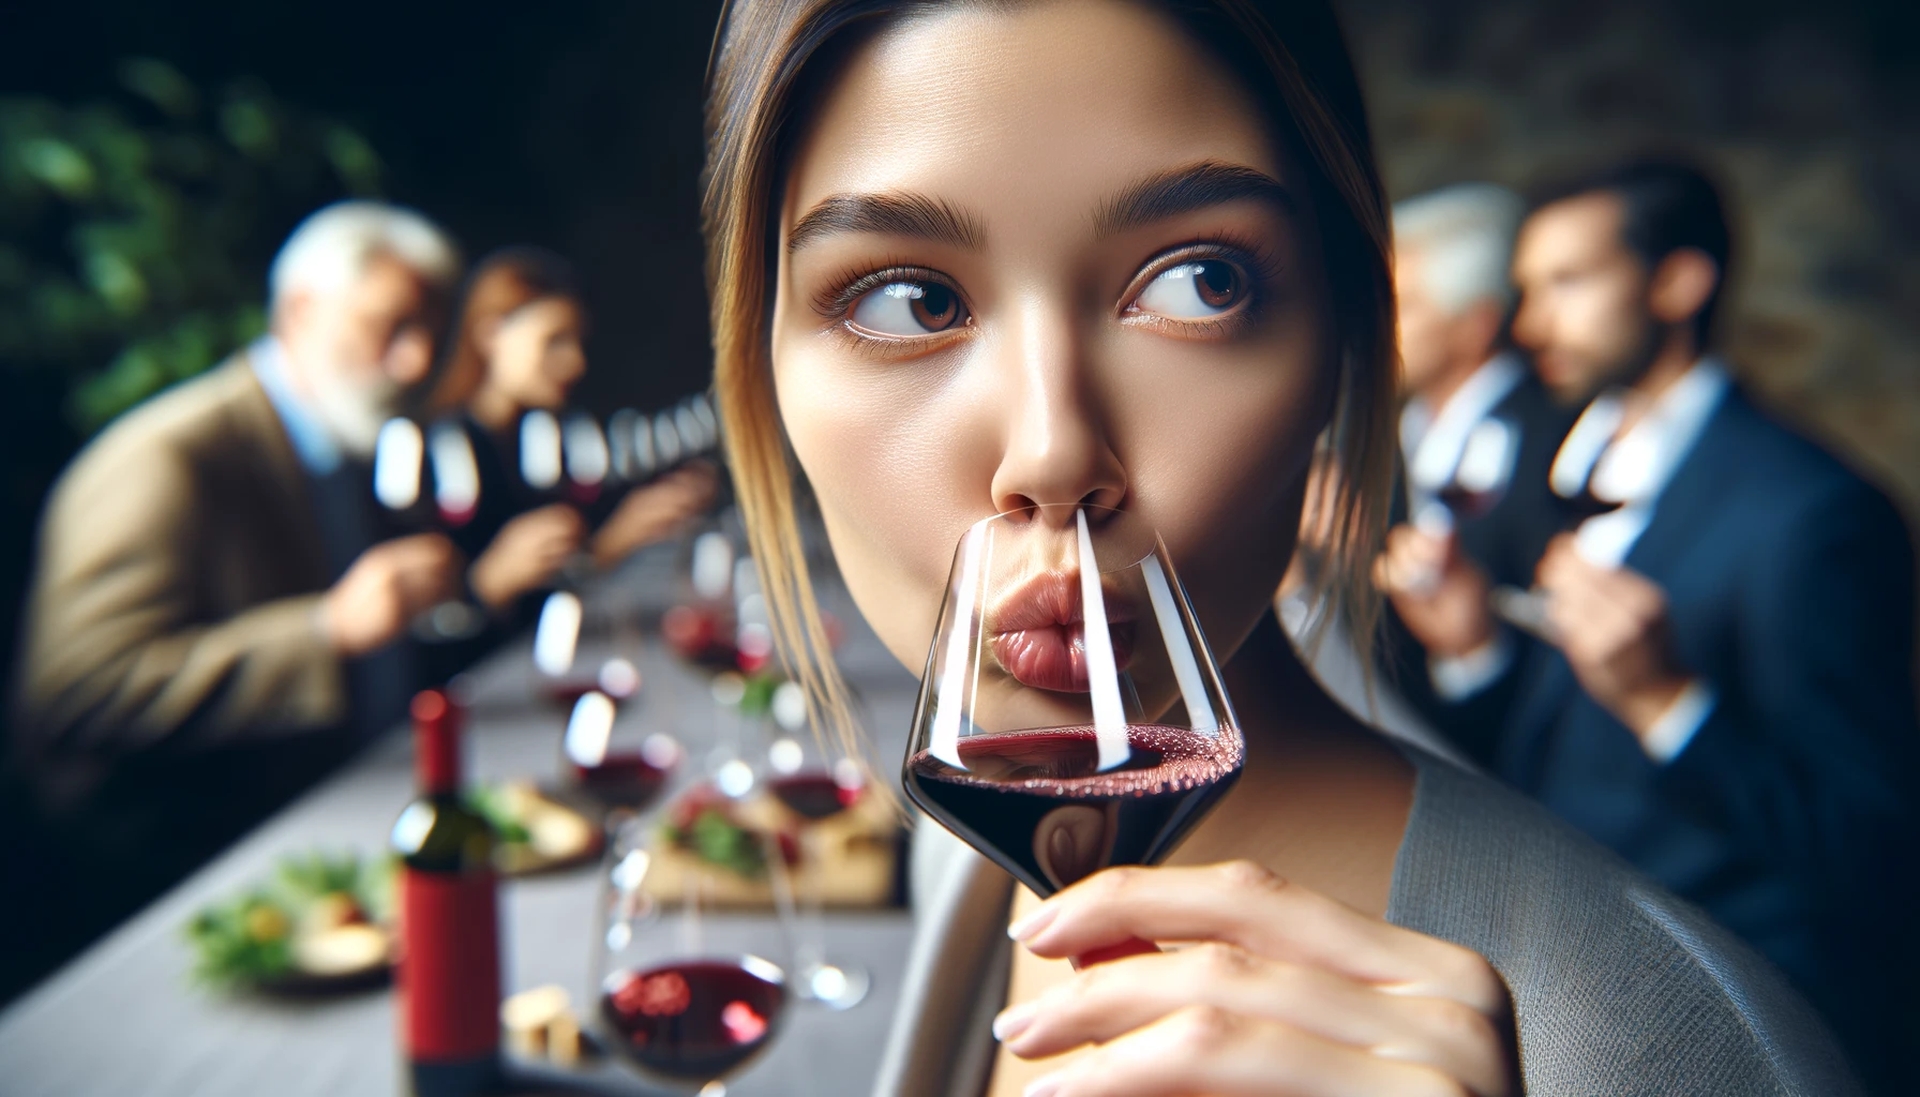 Close-up of a glass of red wine showcasing the mouth puckering after taste, emphasizing the unique sensation of Red Wines Mouth Puckering After Taste.. / image credit: Umut Taydaş